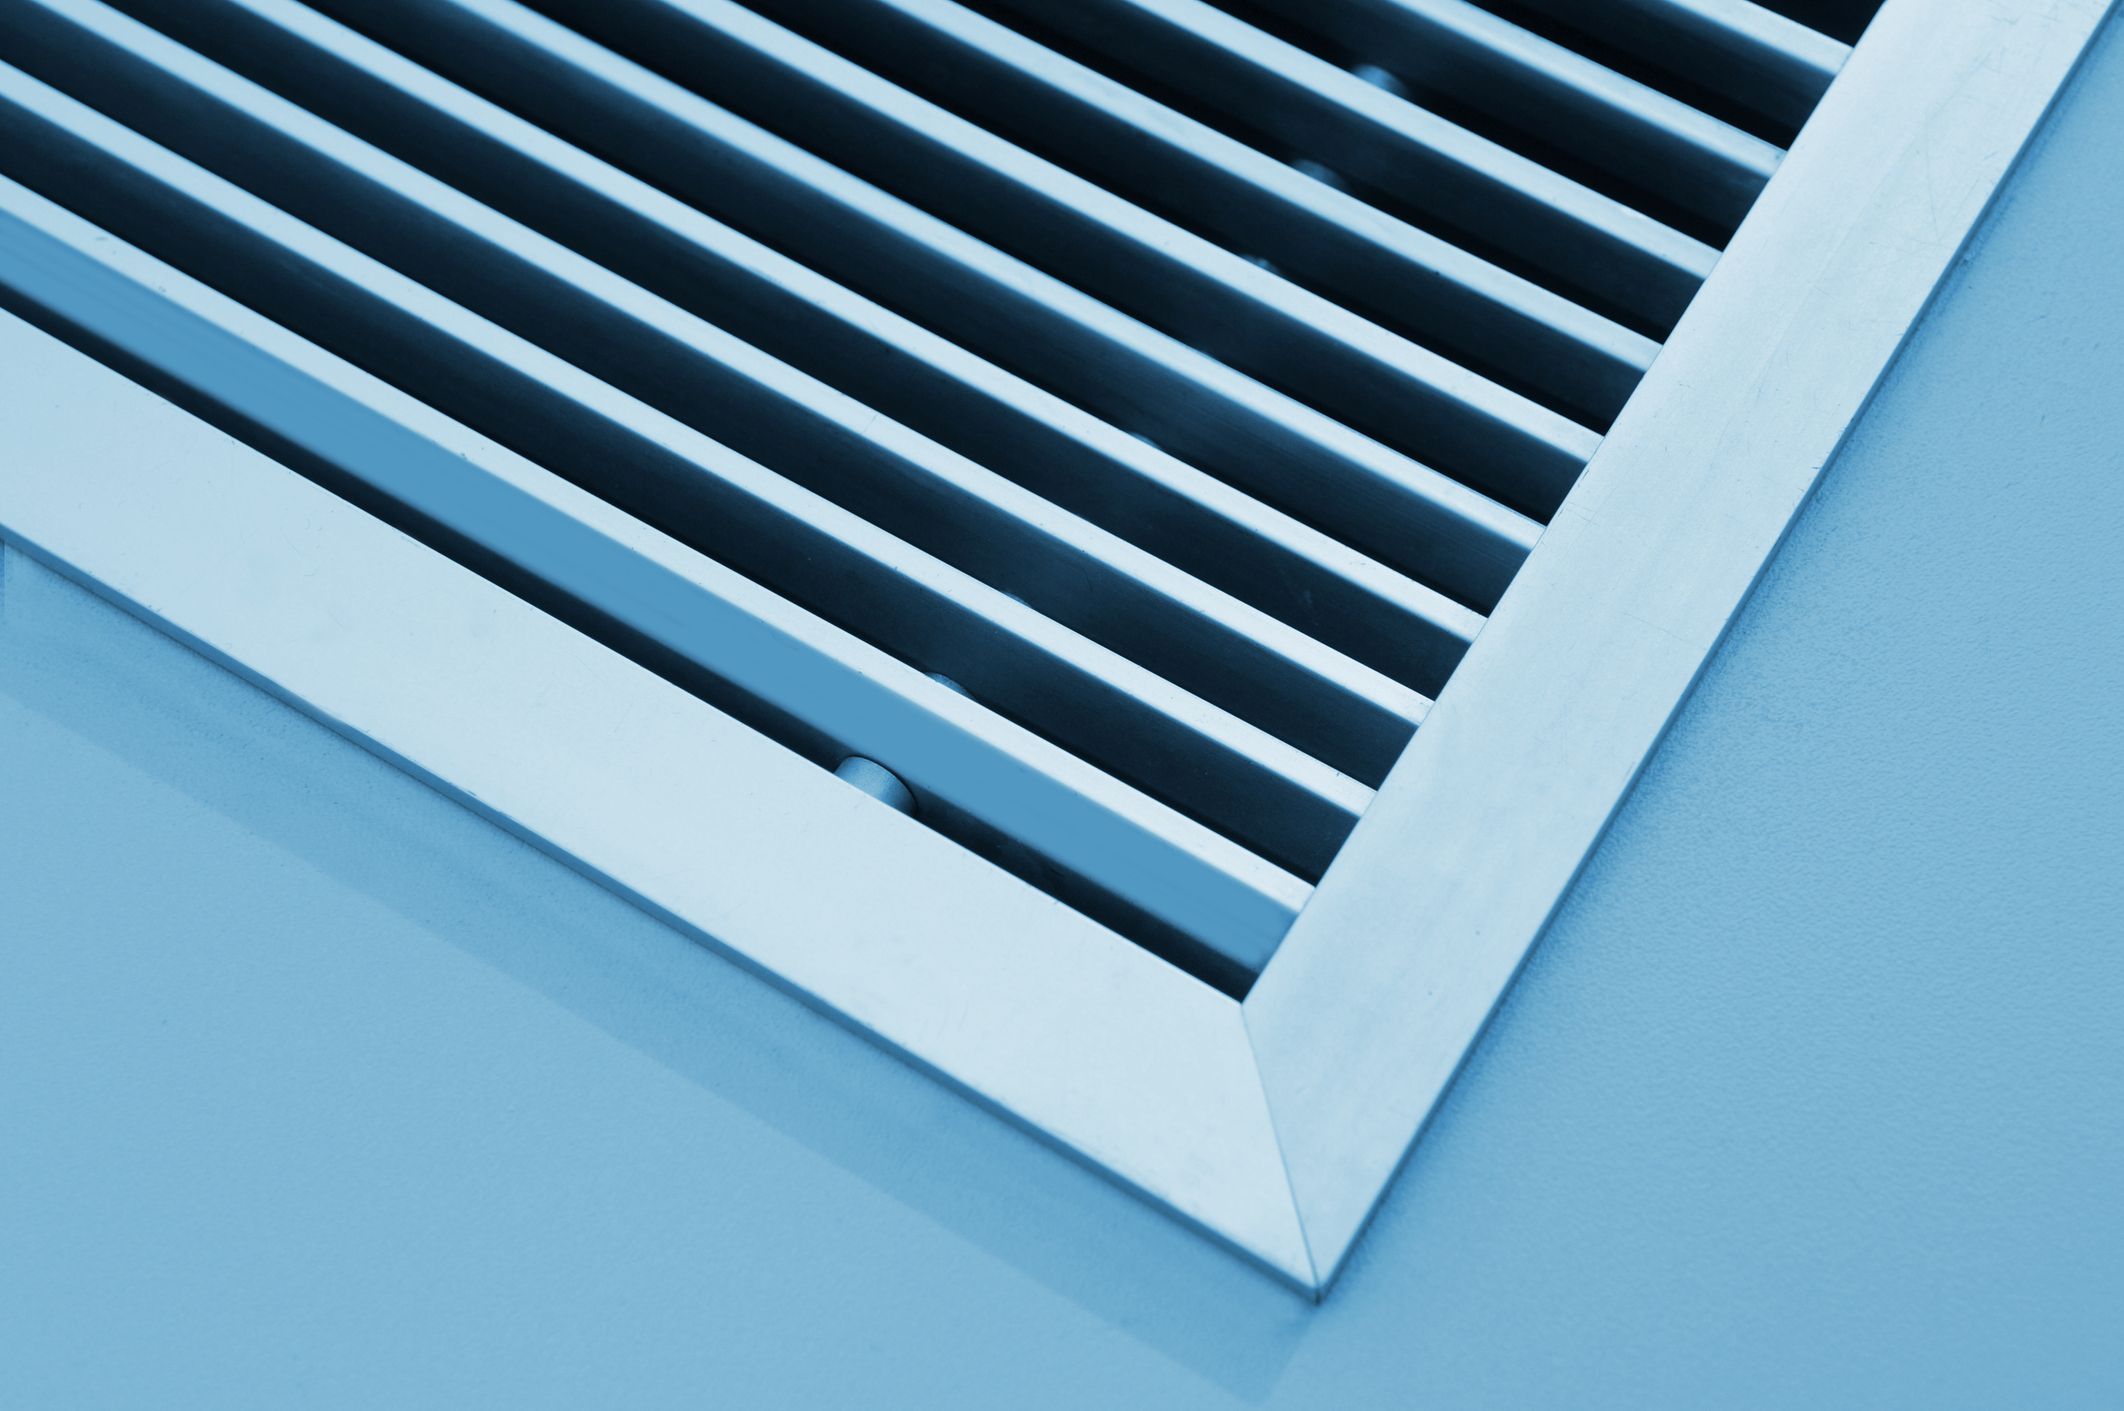 How to Clean Air Ducts Yourself - HVAC Duct Cleaning Tips